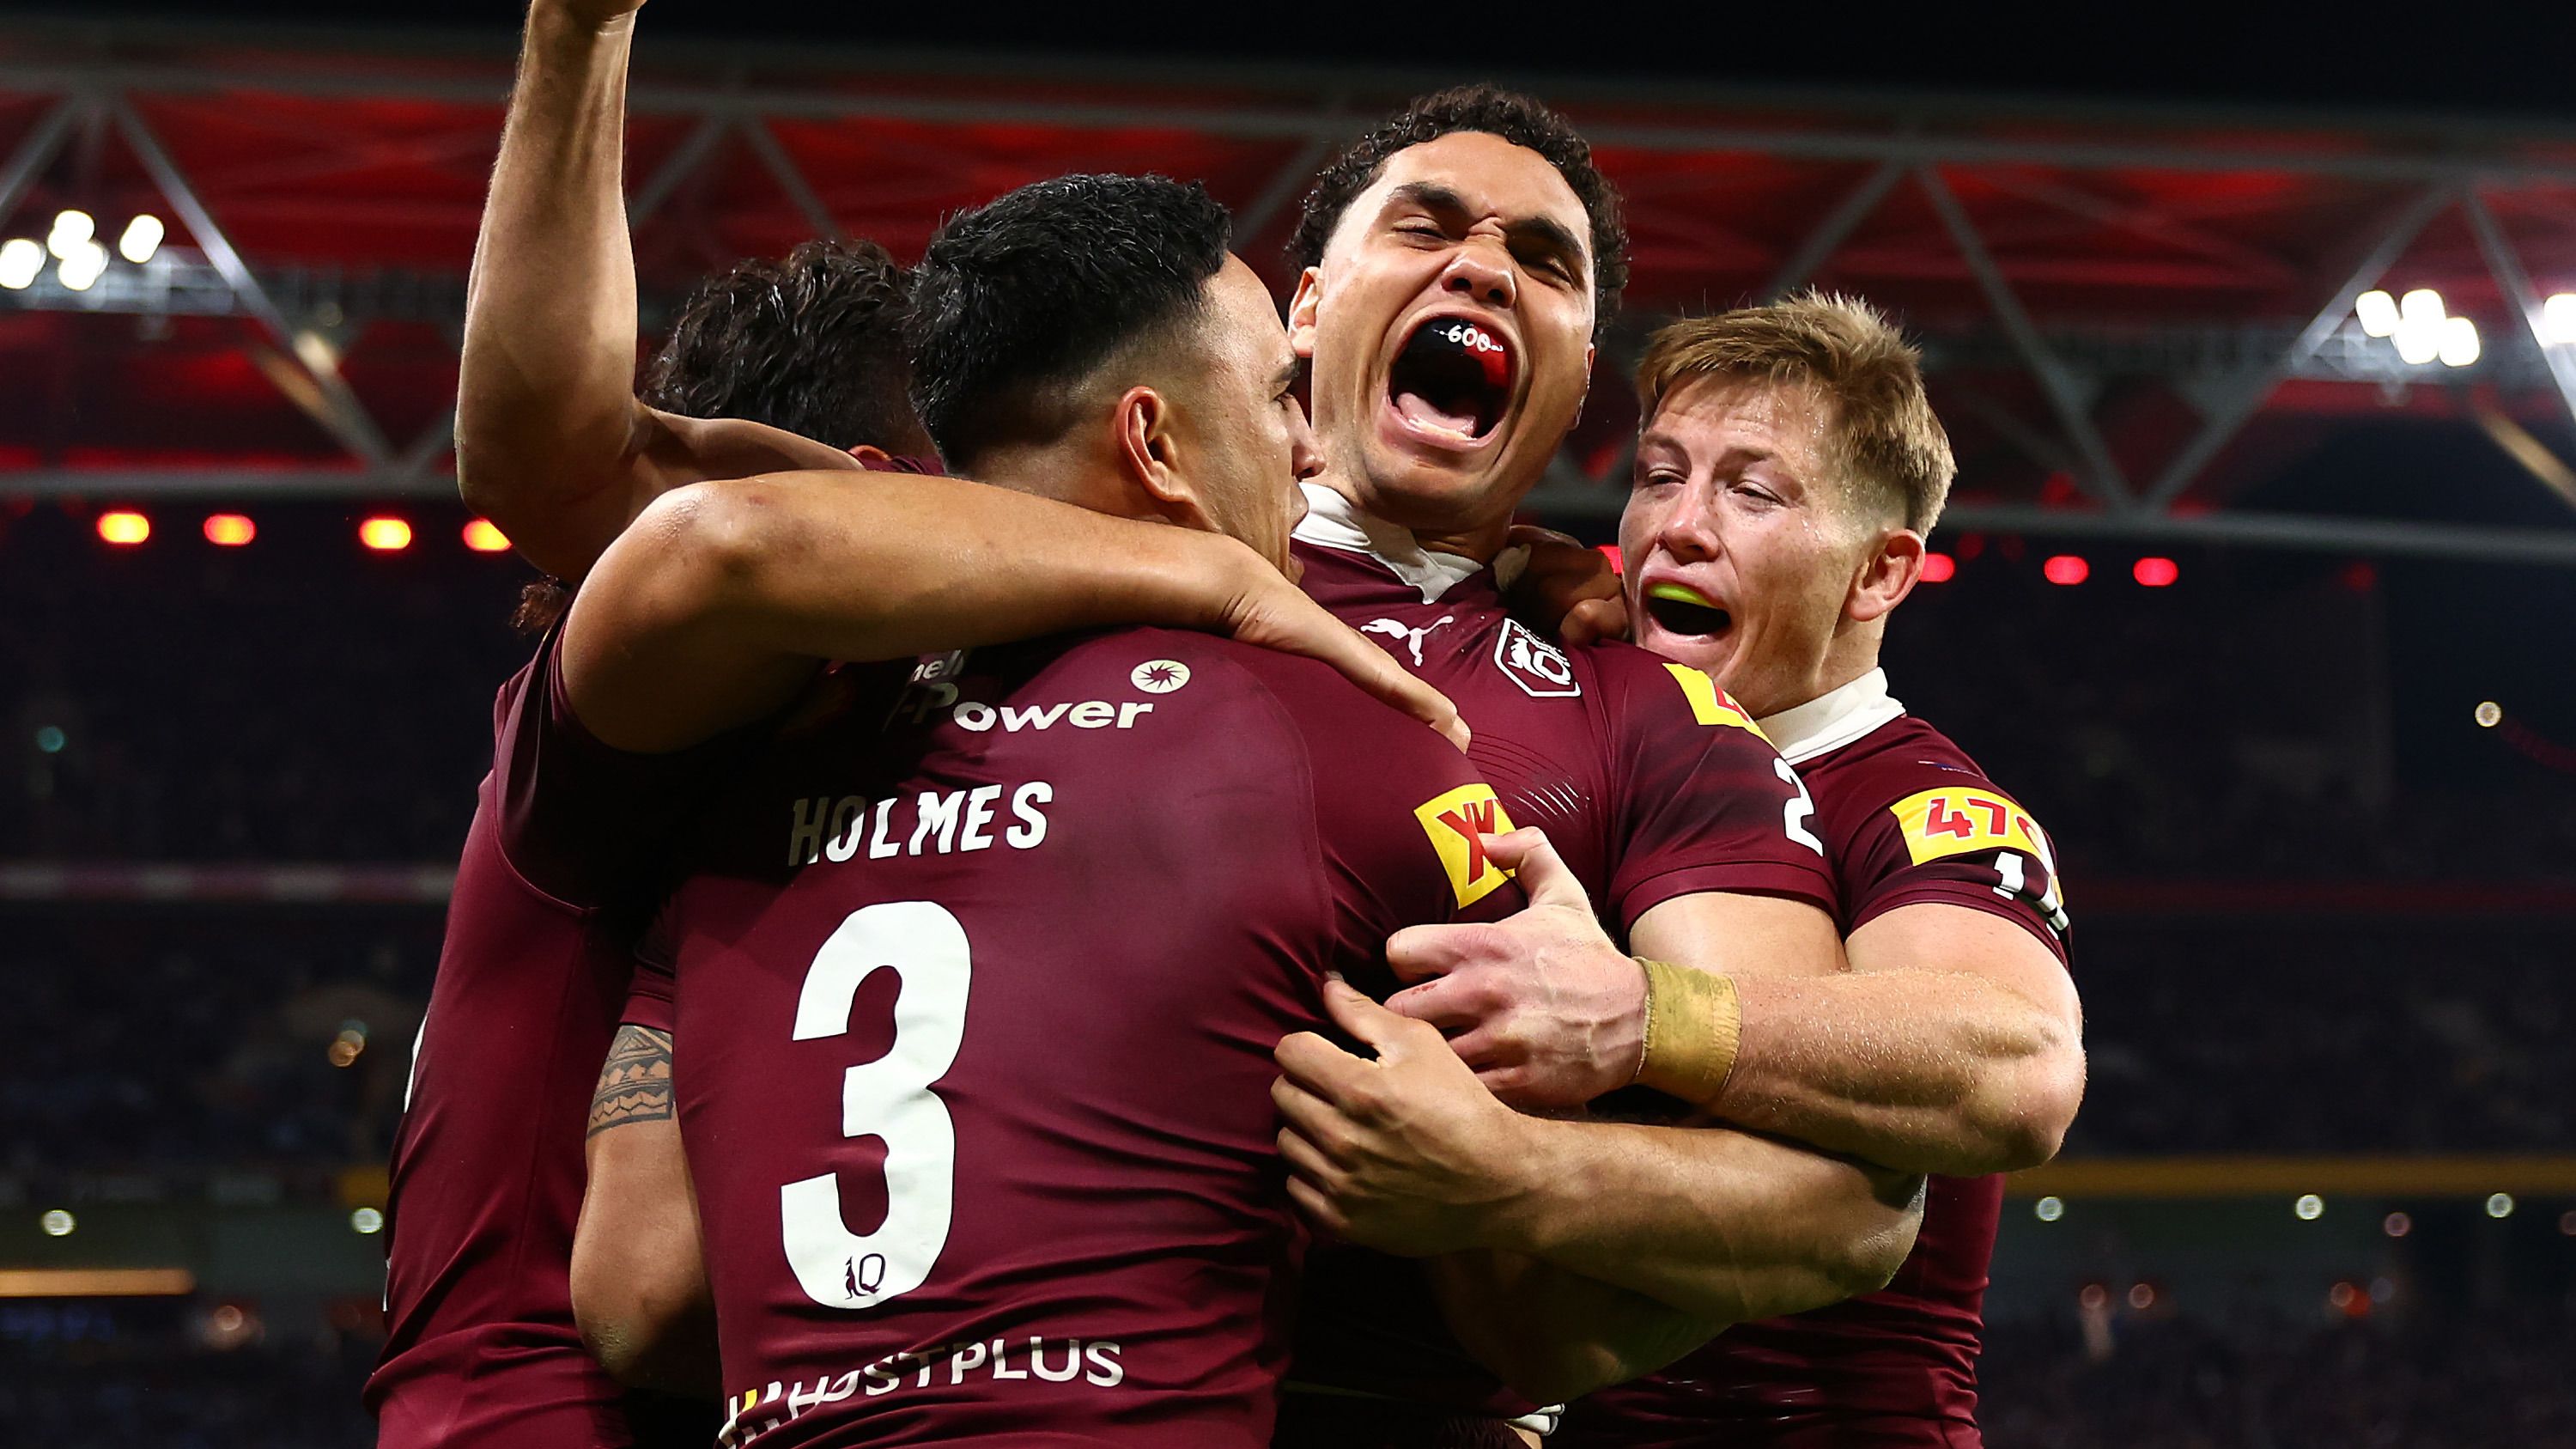 BRISBANE, AUSTRALIA - JUNE 21: during game two of the State of Origin series between the Queensland Maroons and the New South Wales Blues at Suncorp Stadium on June 21, 2023 in Brisbane, Australia. (Photo by Chris Hyde/Getty Images)